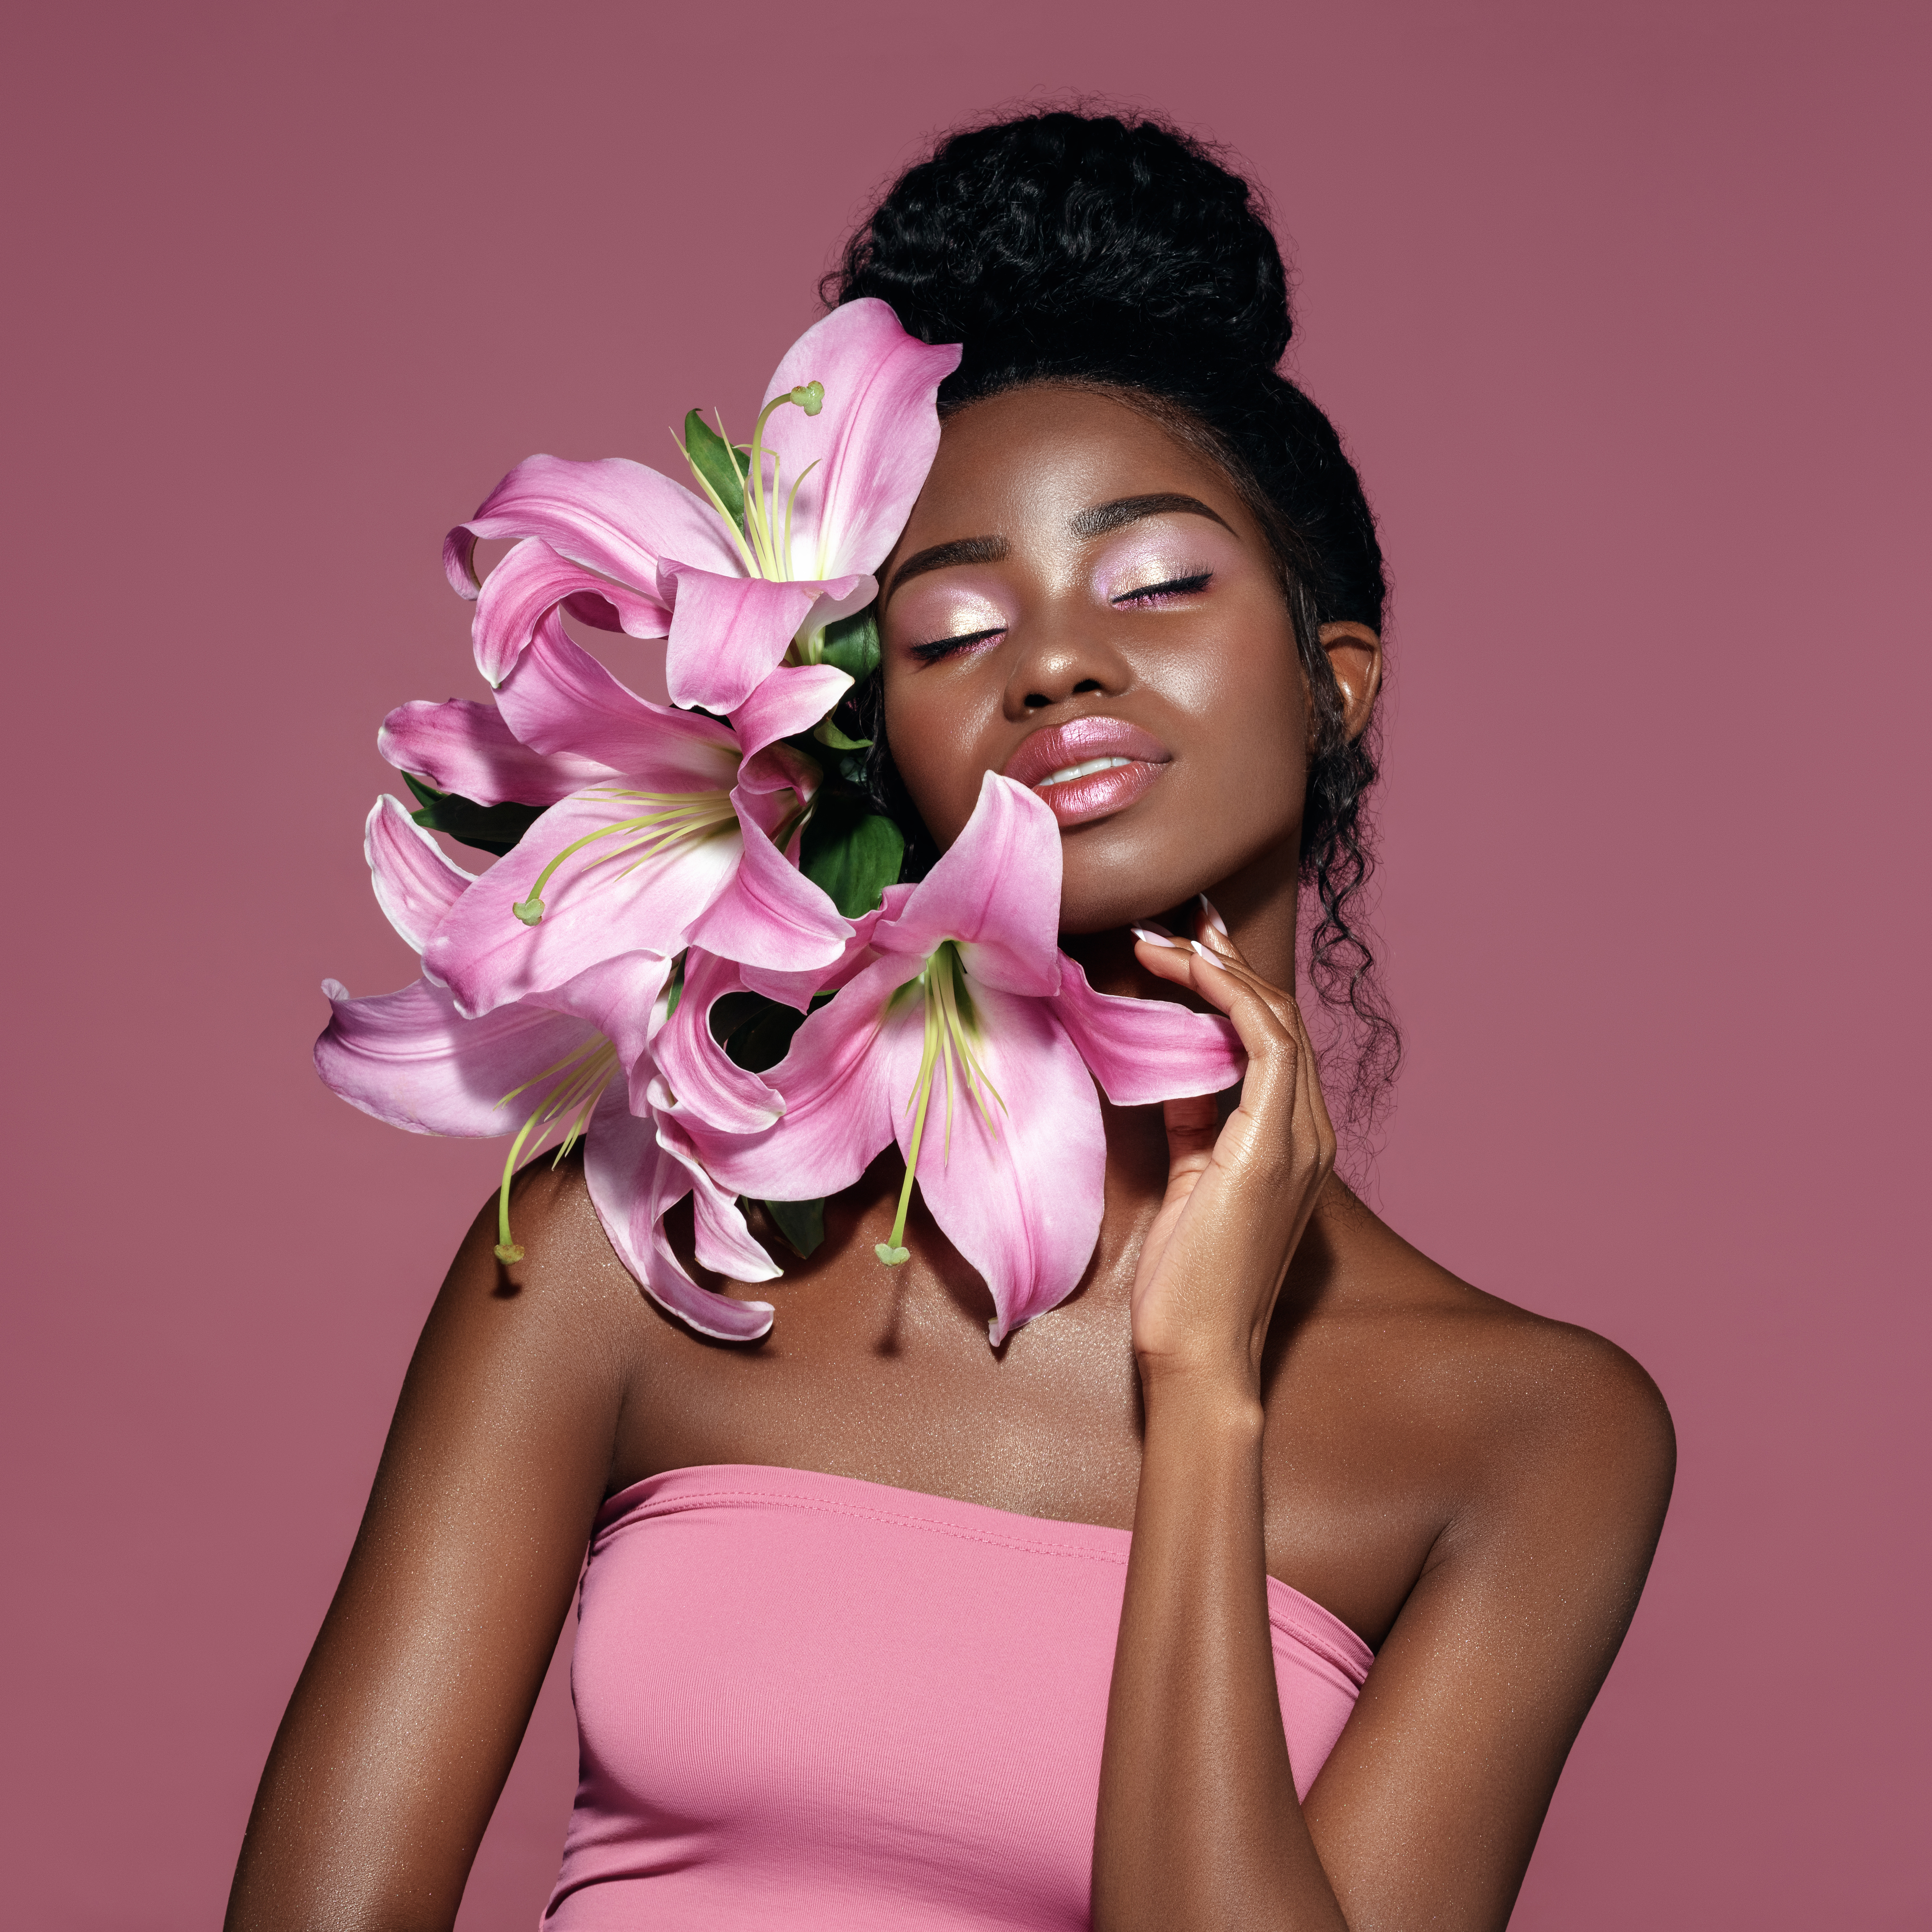 Fashion beauty portrait of young African American model with pink art make up posing with lily flowers against pink background.